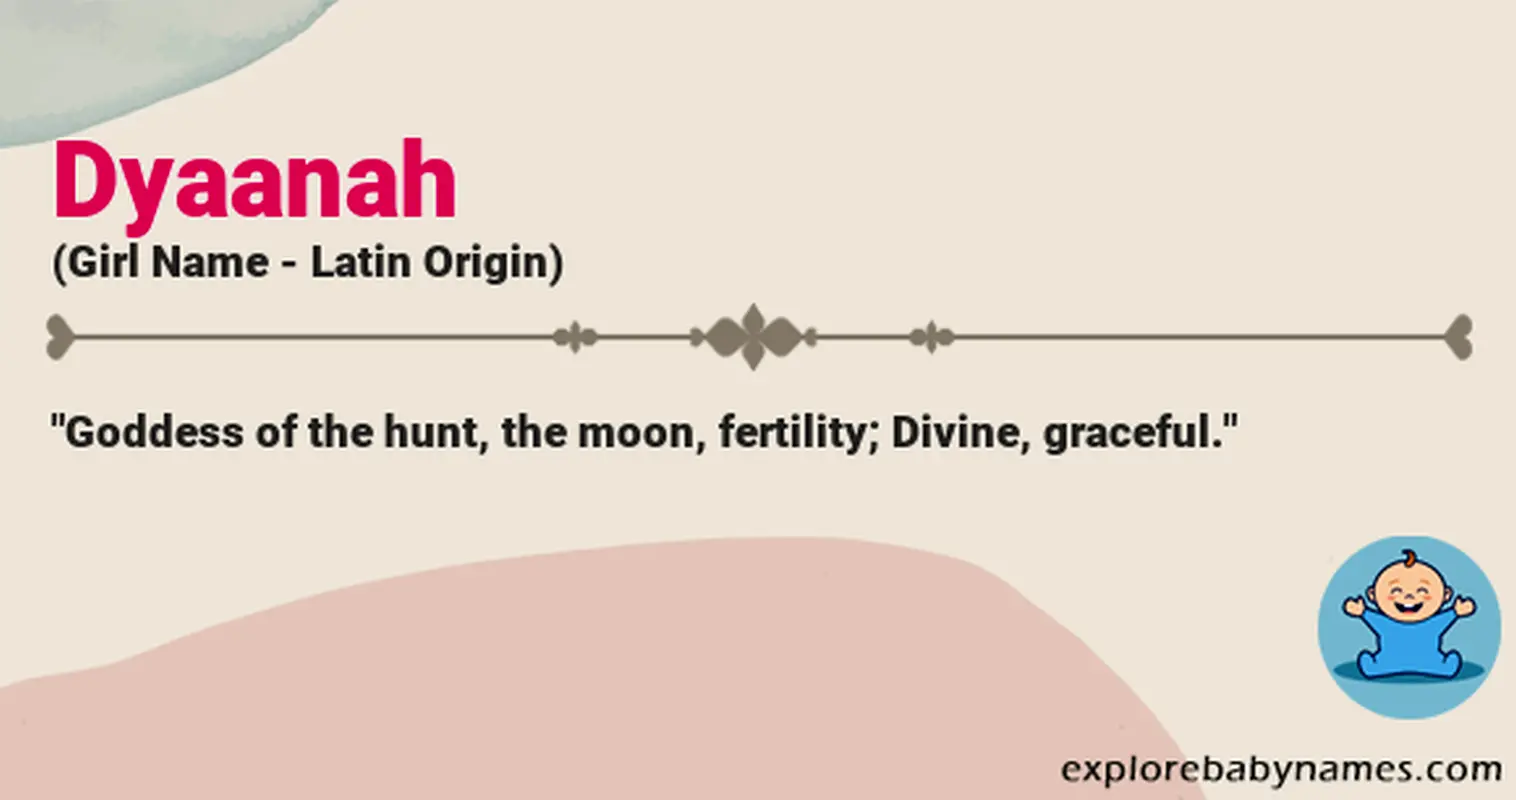 Meaning of Dyaanah